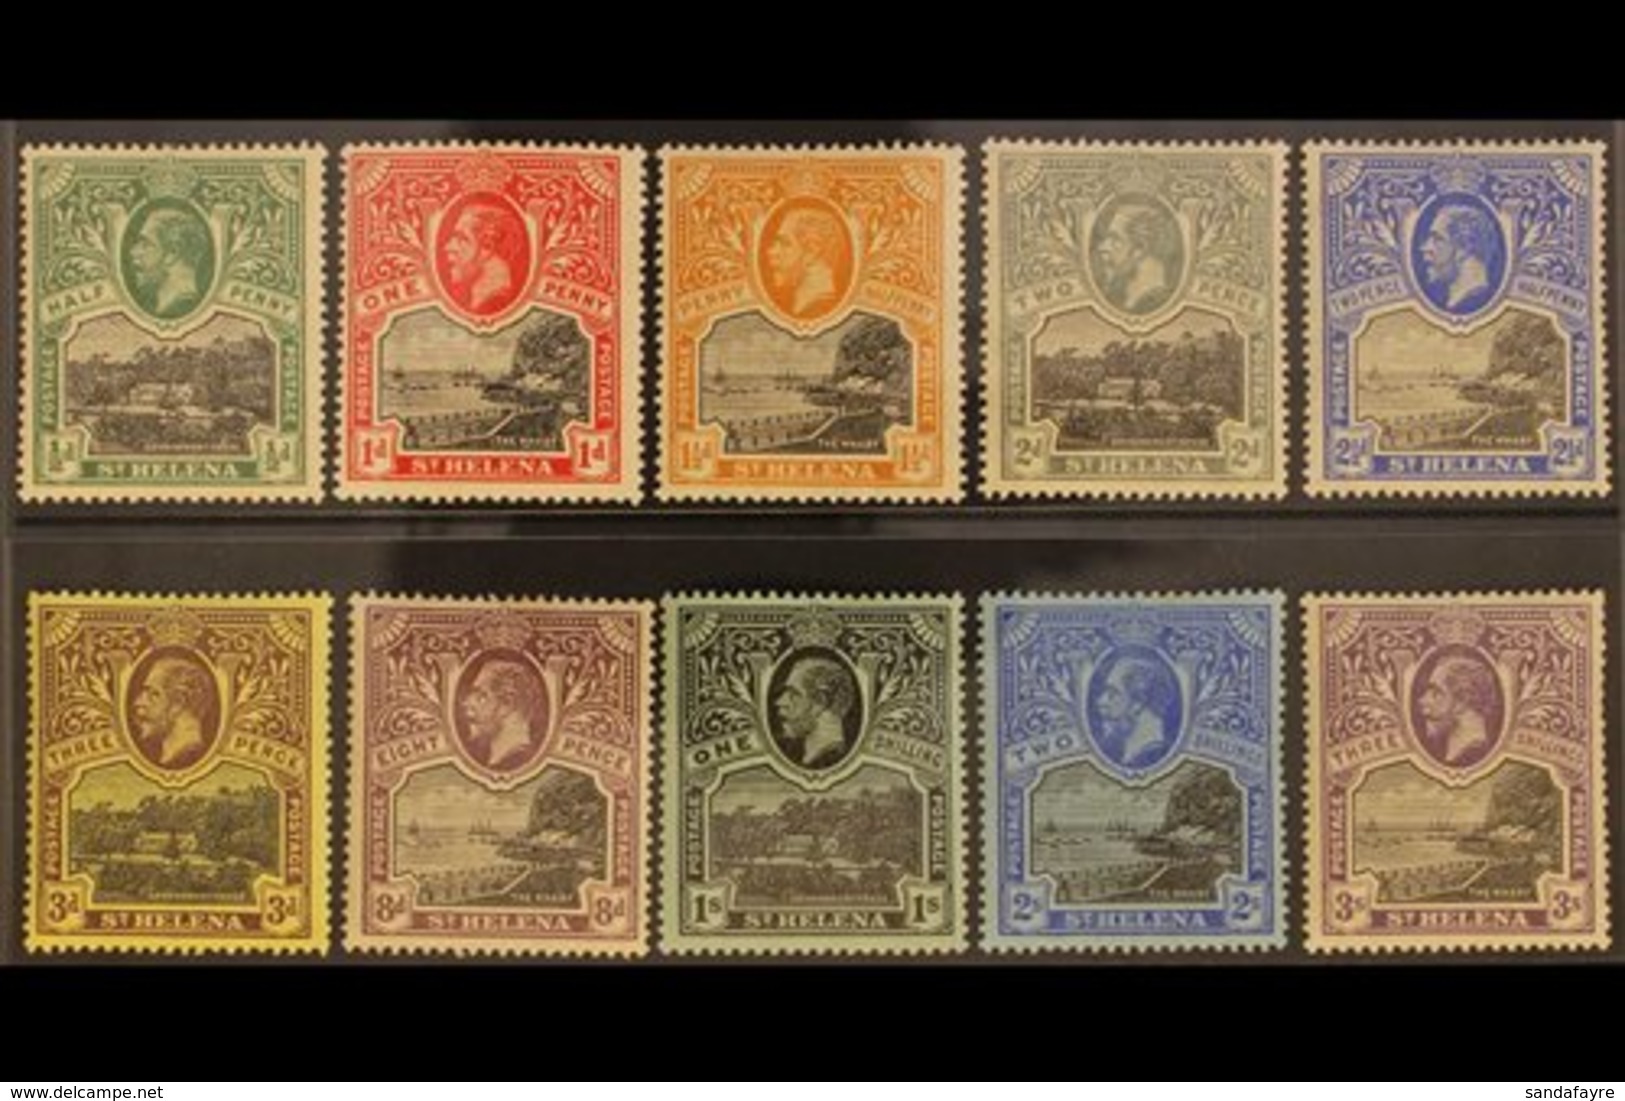 1912-16 Definitives Complete Set, SG 72/81, Very Fine Mint. Fresh And Attractive! (10 Stamps) For More Images, Please Vi - Saint Helena Island